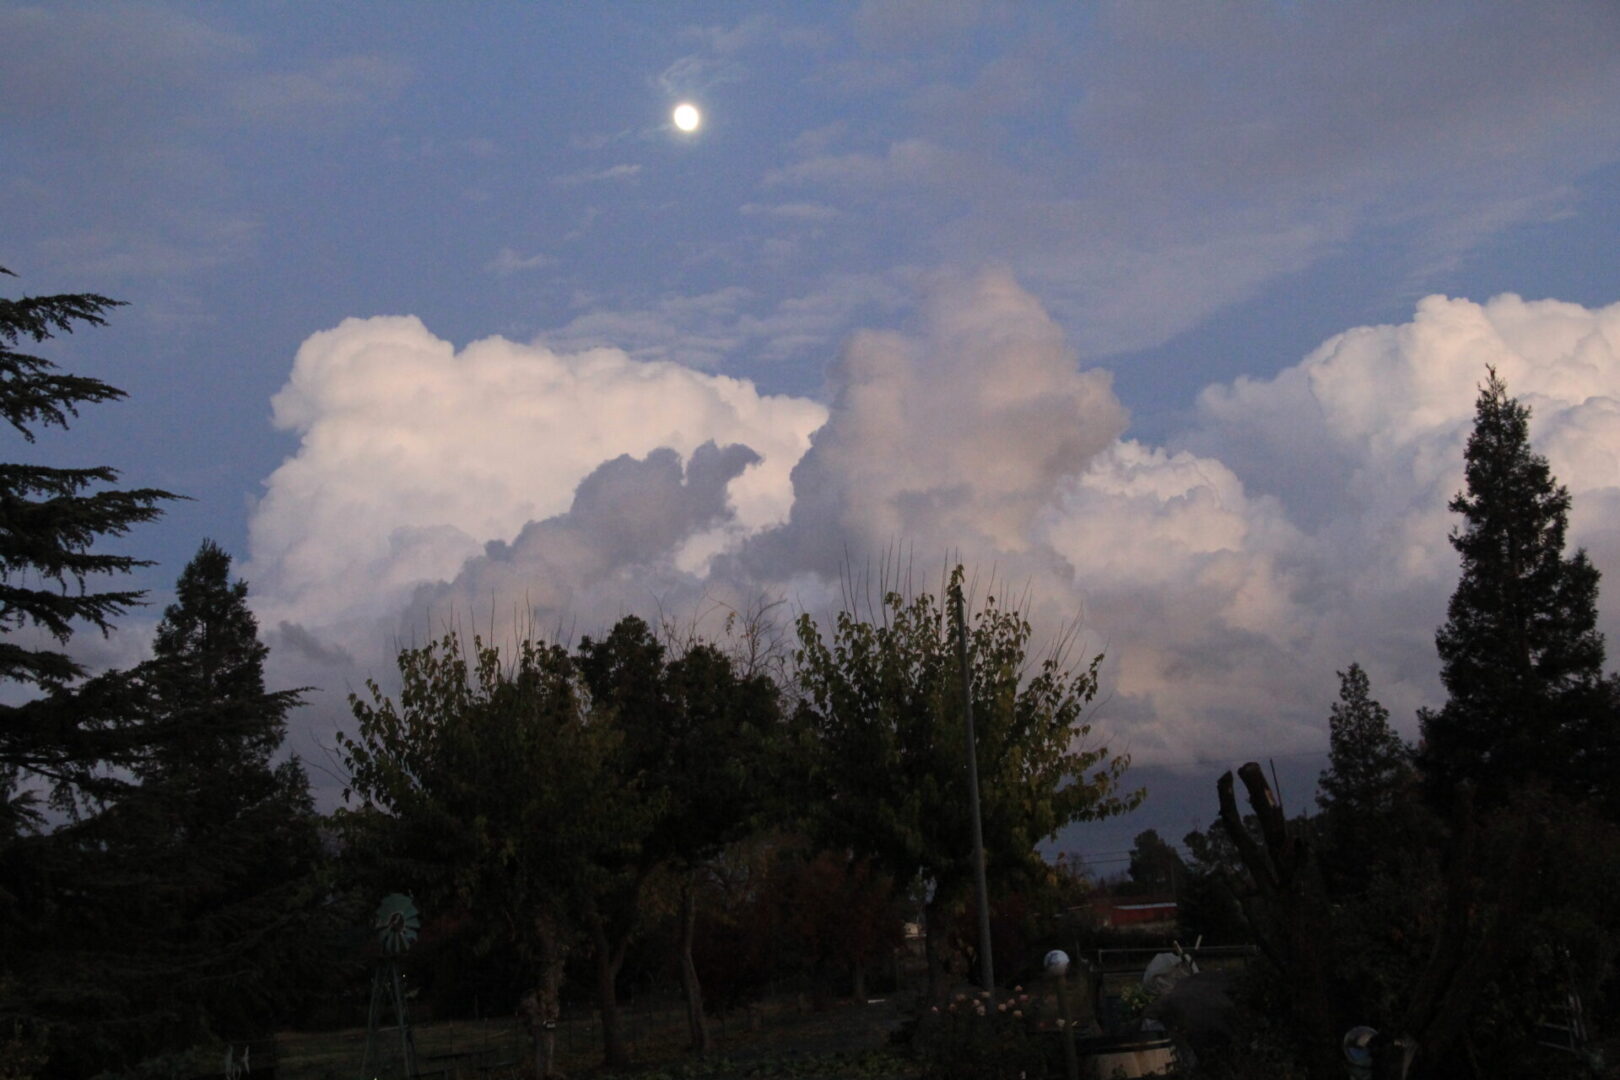 Close view of moon, clouds and trees